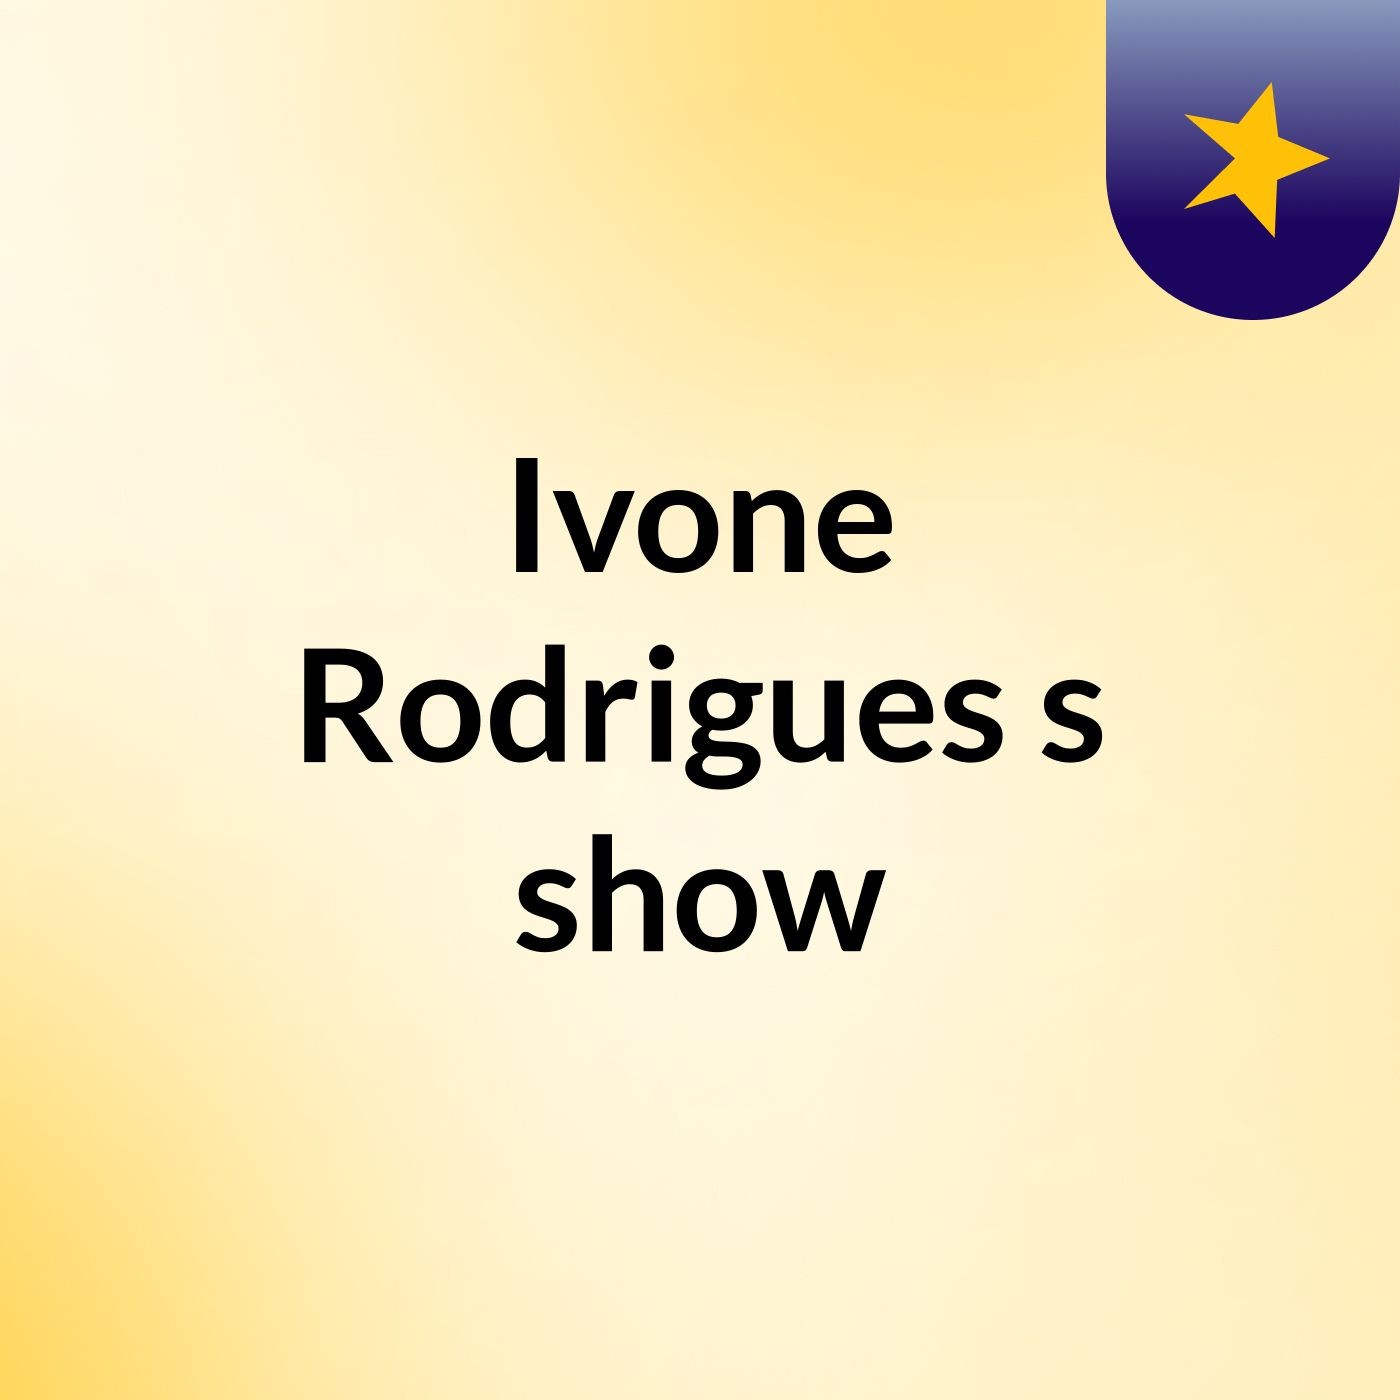 Ivone Rodrigues's show